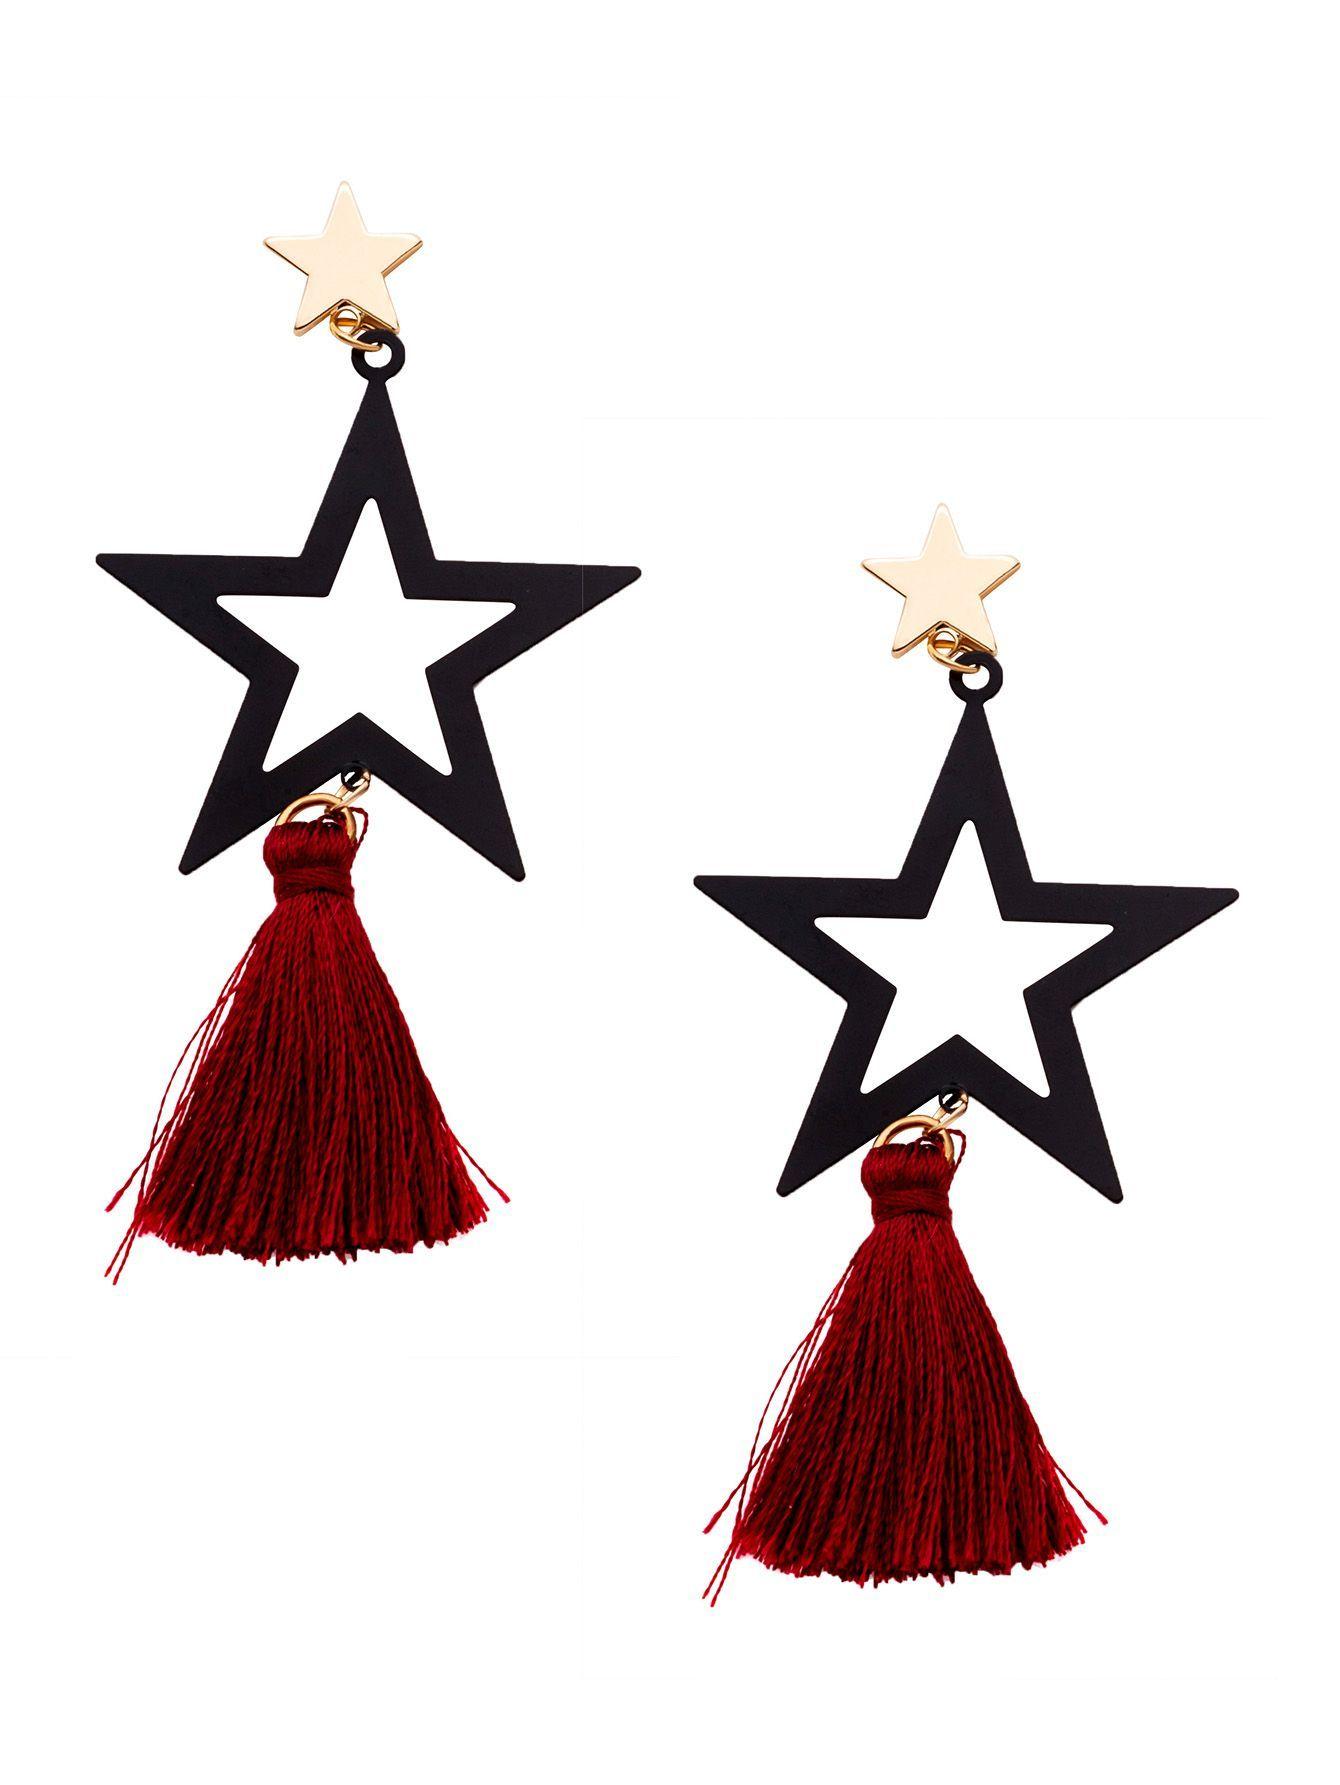 Hollow Red Star Logo - Black Star Red Tassel Hollow Out Drop Earrings. Make Your Statement